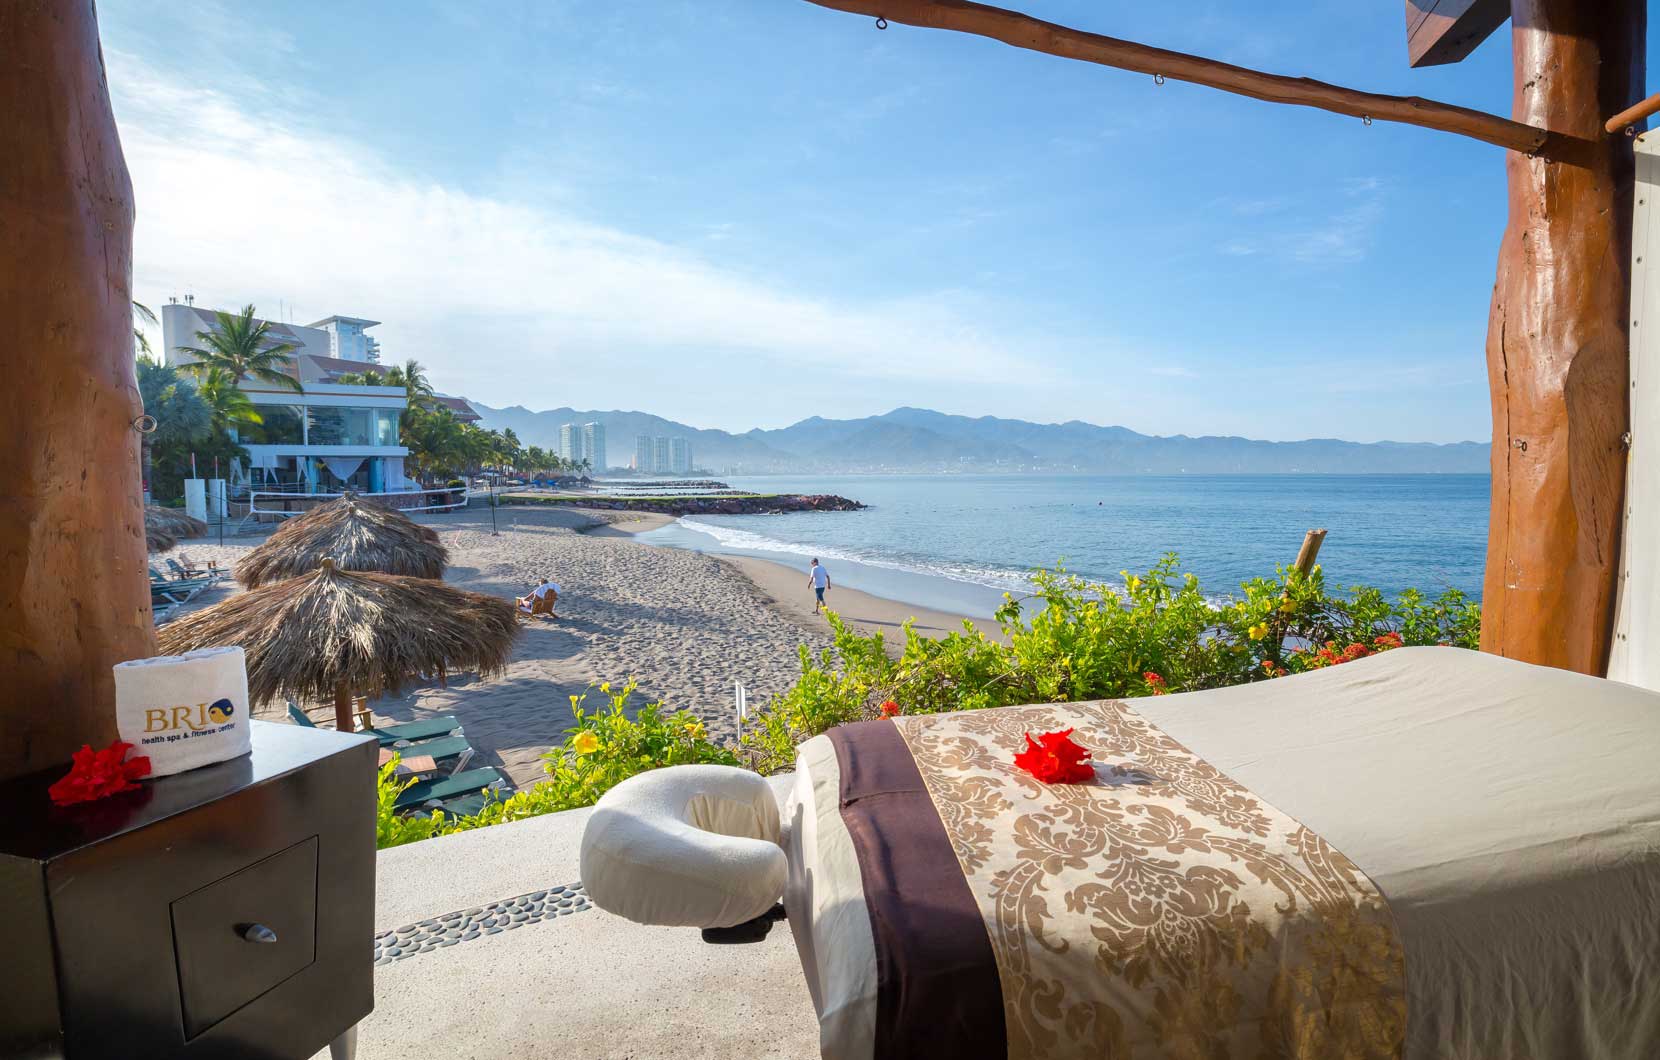 Experience utter peace in one of Puerto Vallarta's massage cabins.